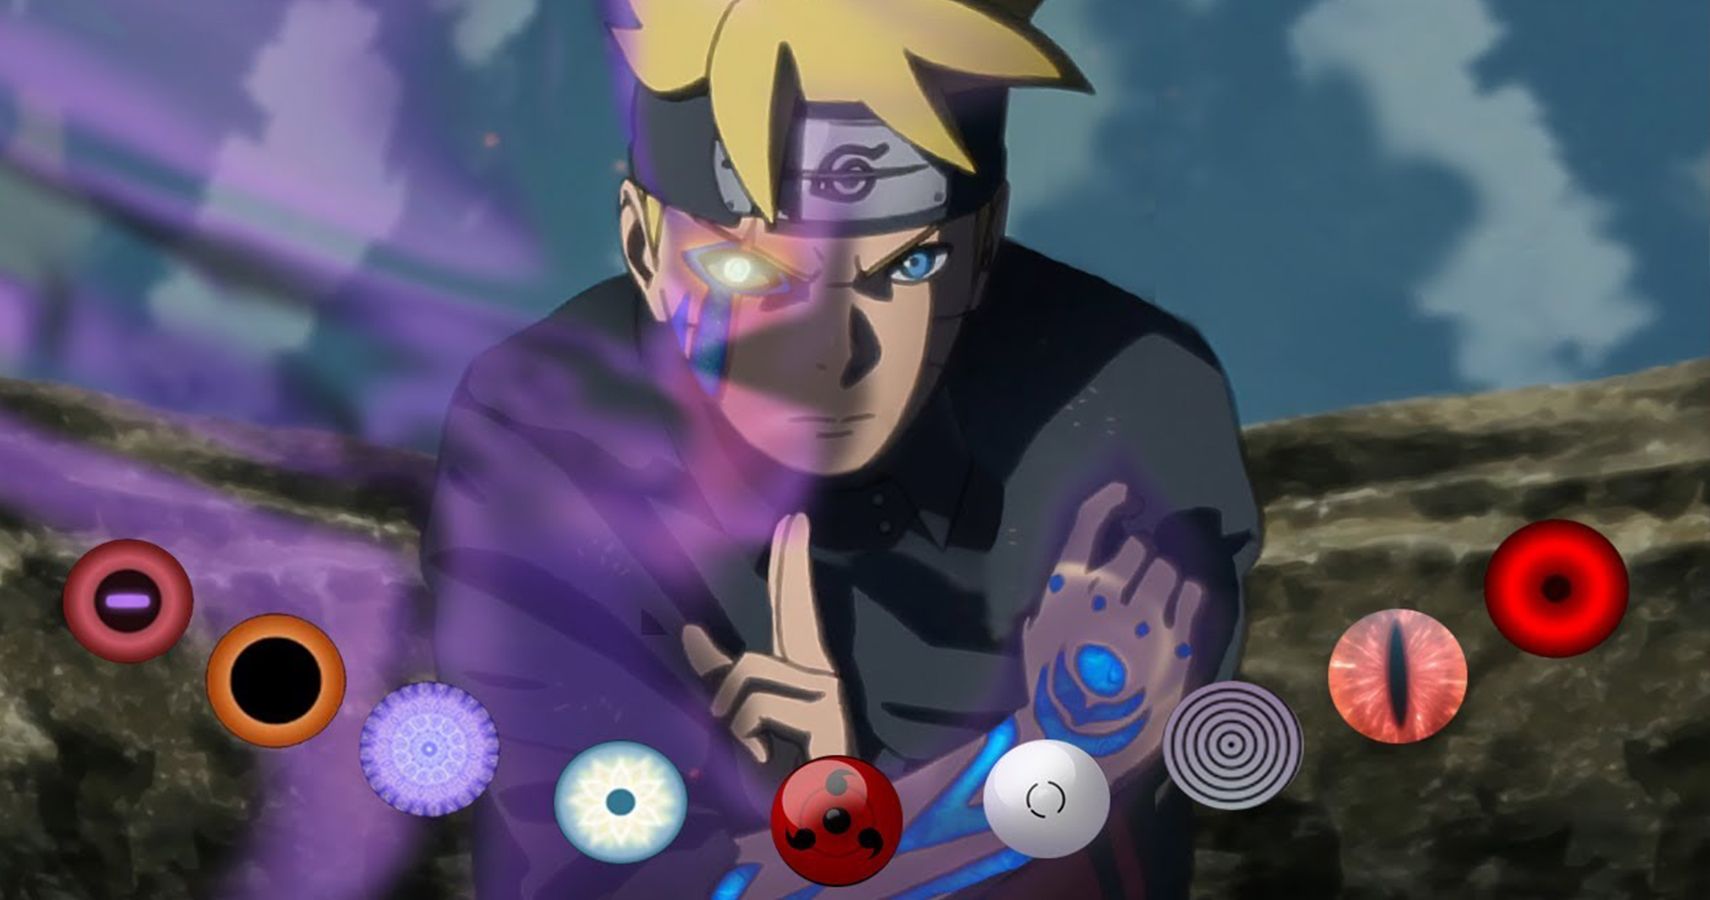 What are your thoughts on the future of Boruto, please go into